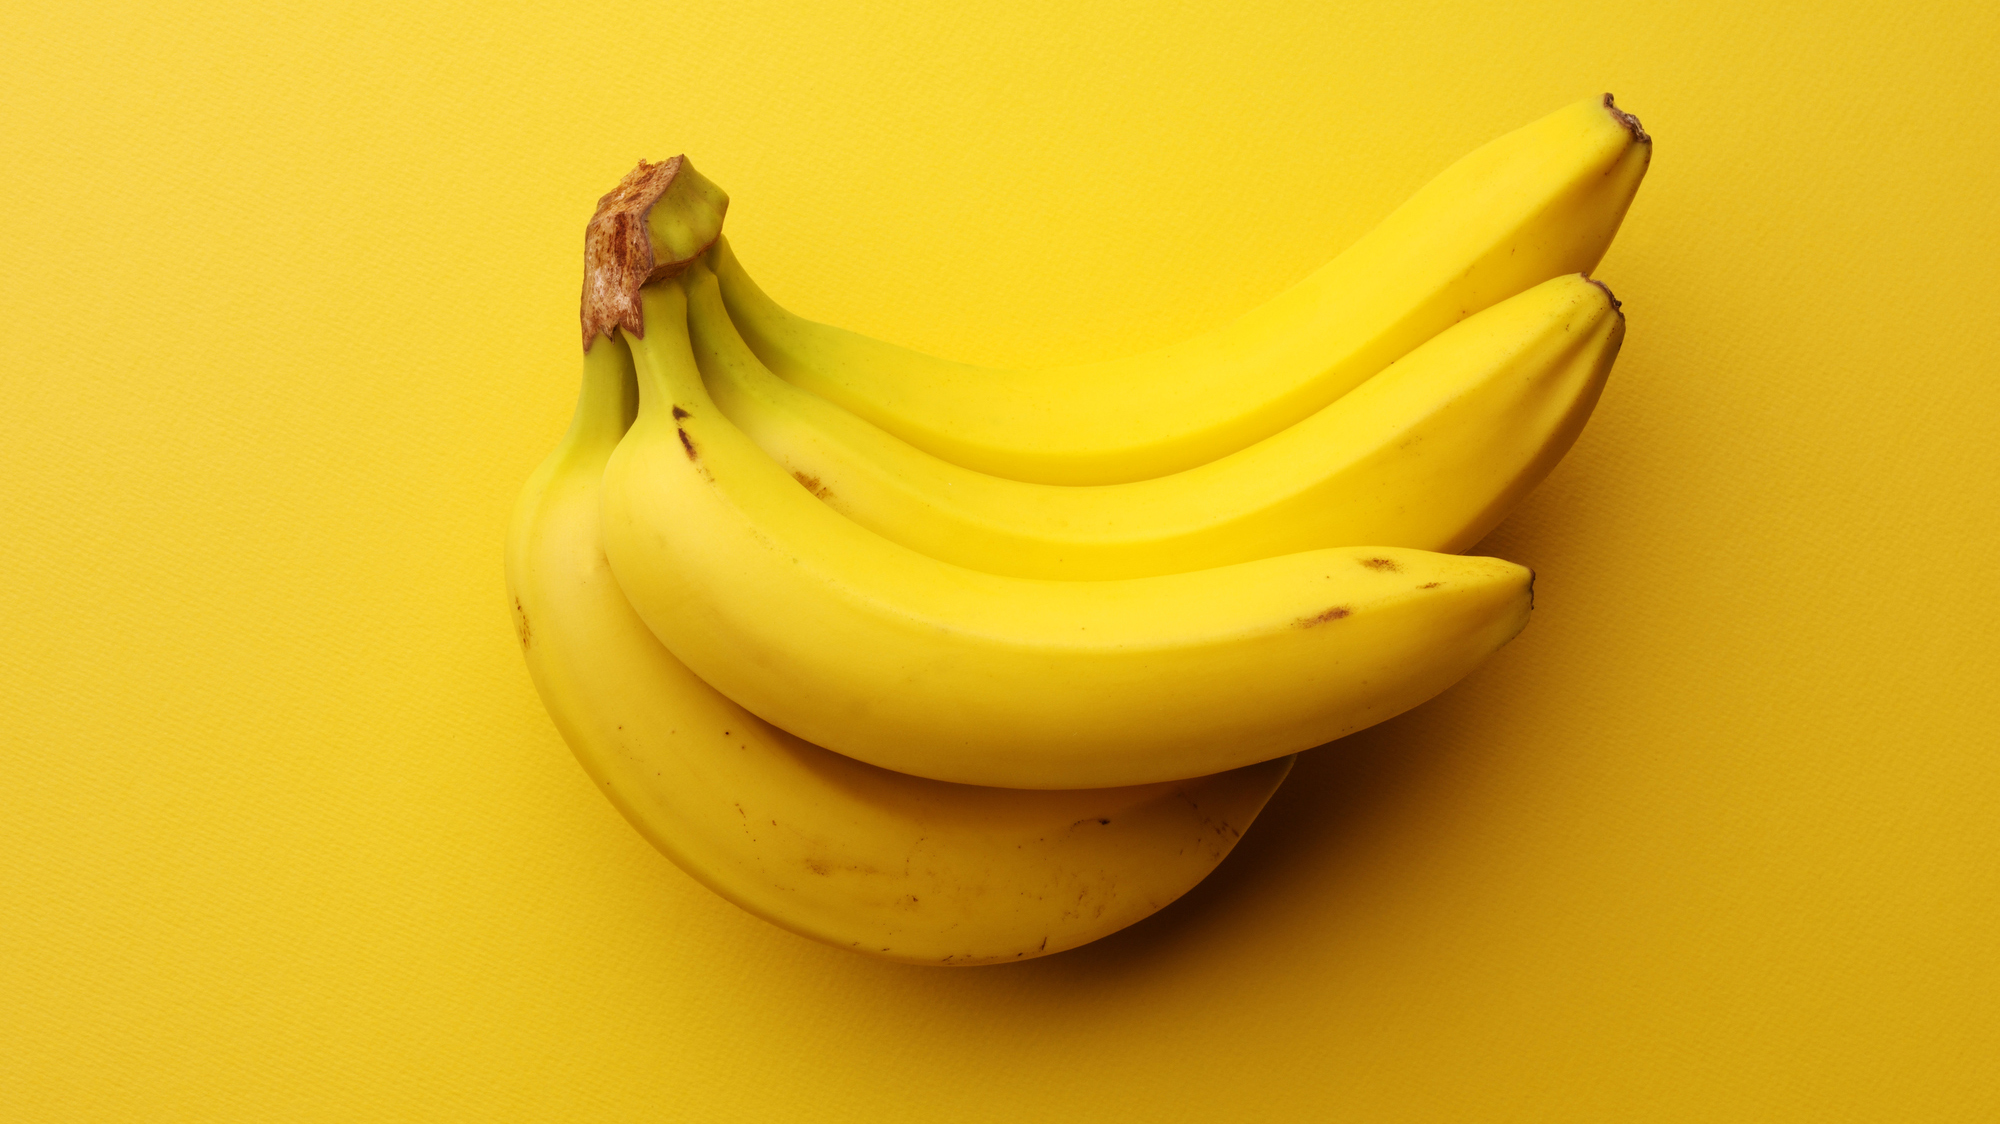 Bananas on a yellow background.